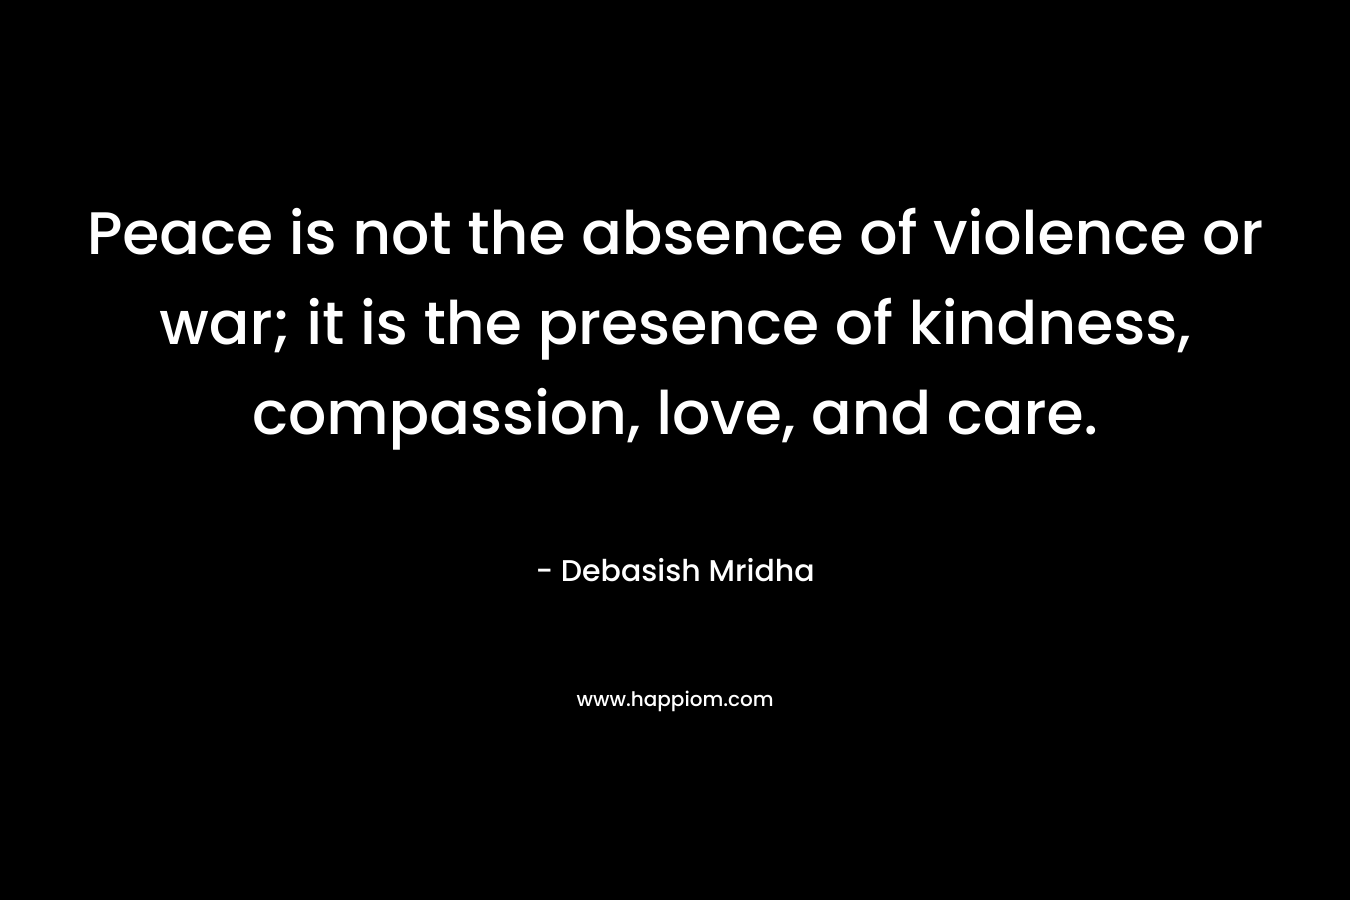 Peace is not the absence of violence or war; it is the presence of kindness, compassion, love, and care.